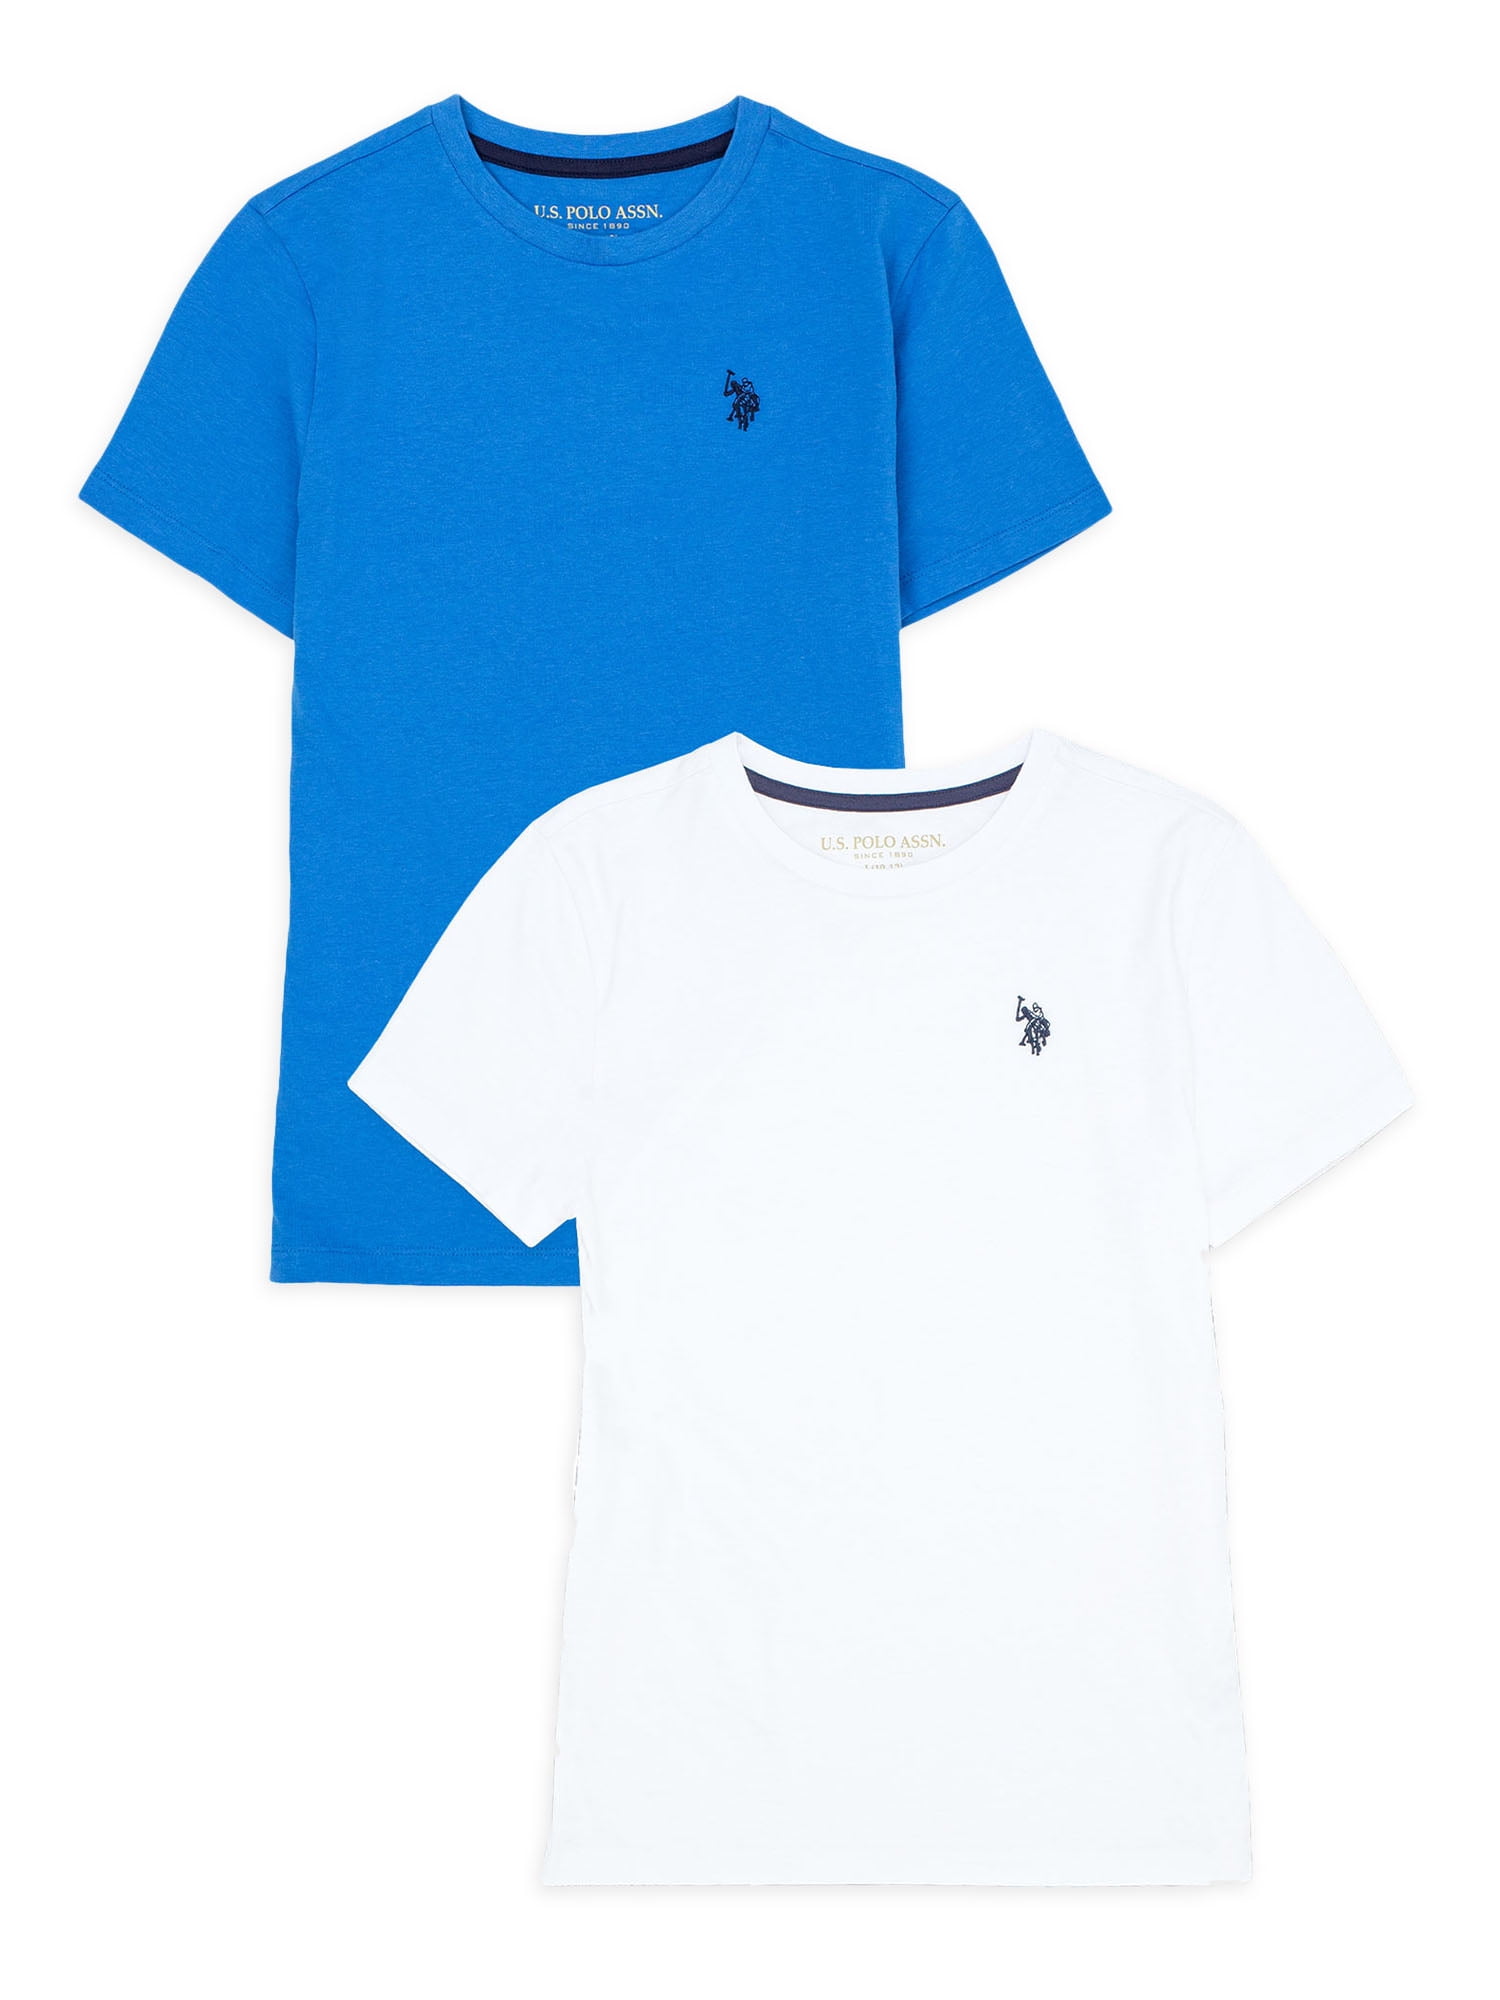 Polo Assn U.S 3 Pack Mens Big and Tall White Crew-Neck Undershirt T-Shirts 